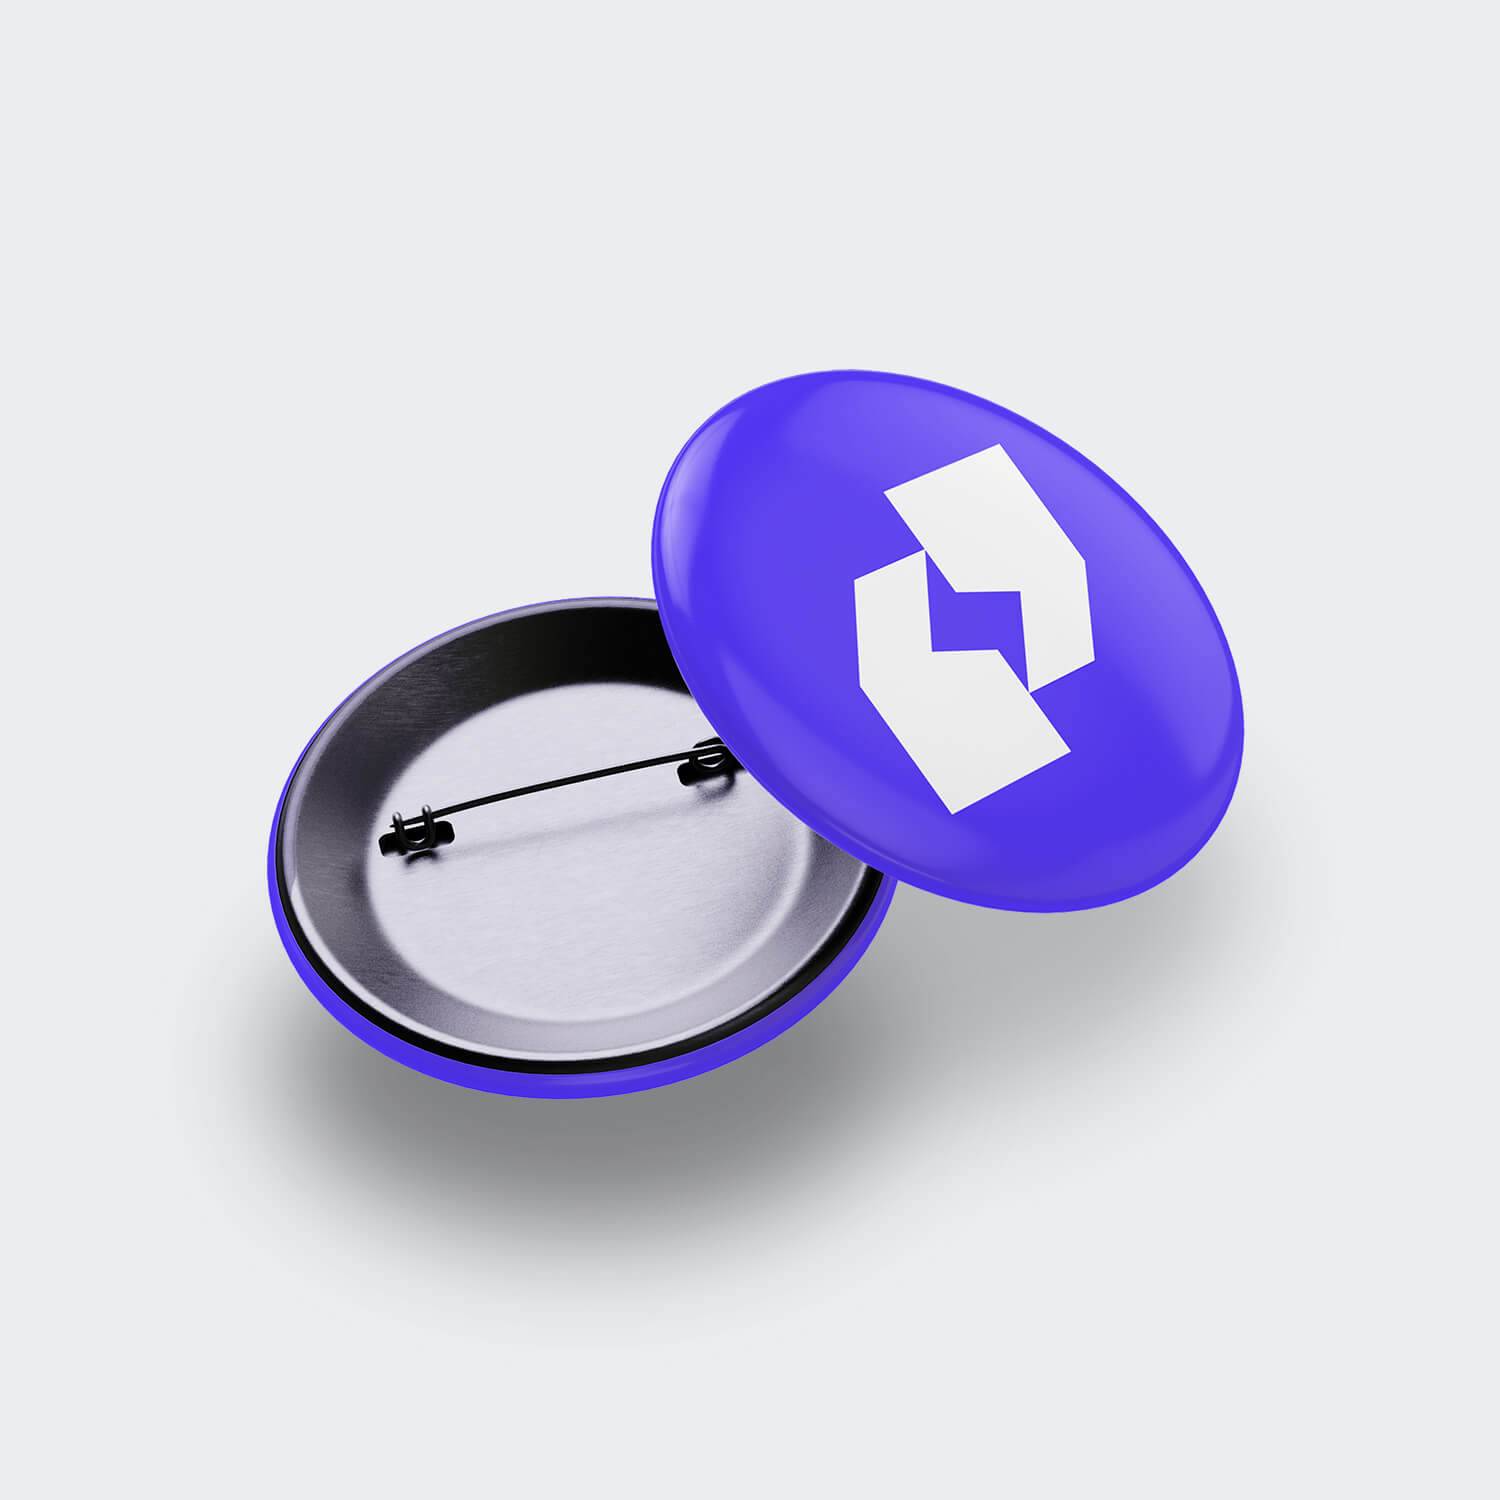 Two purple buttons displaying a white Lightning Talks symbol